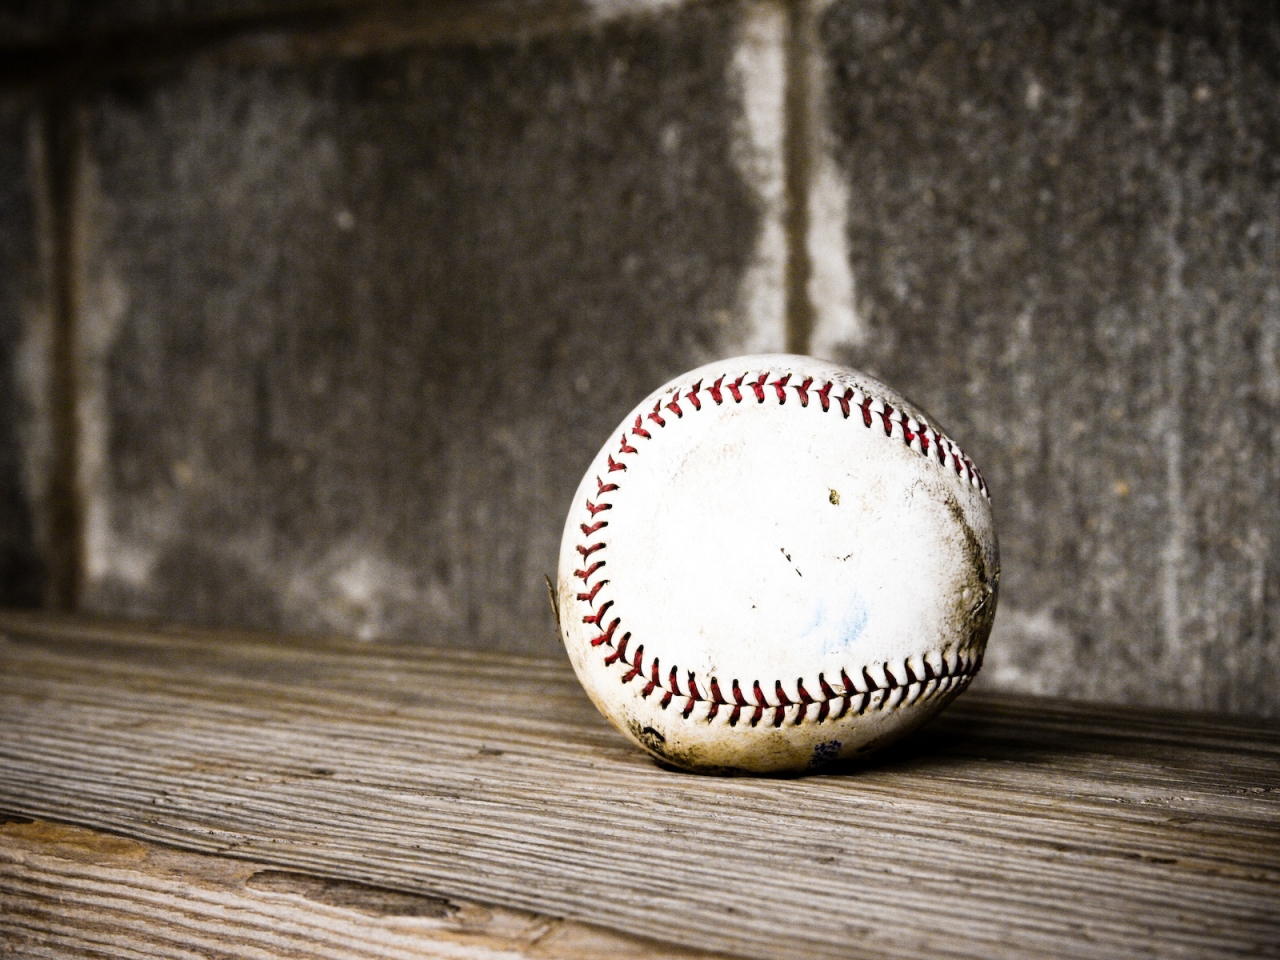 Used Baseball for 1280 x 960 resolution